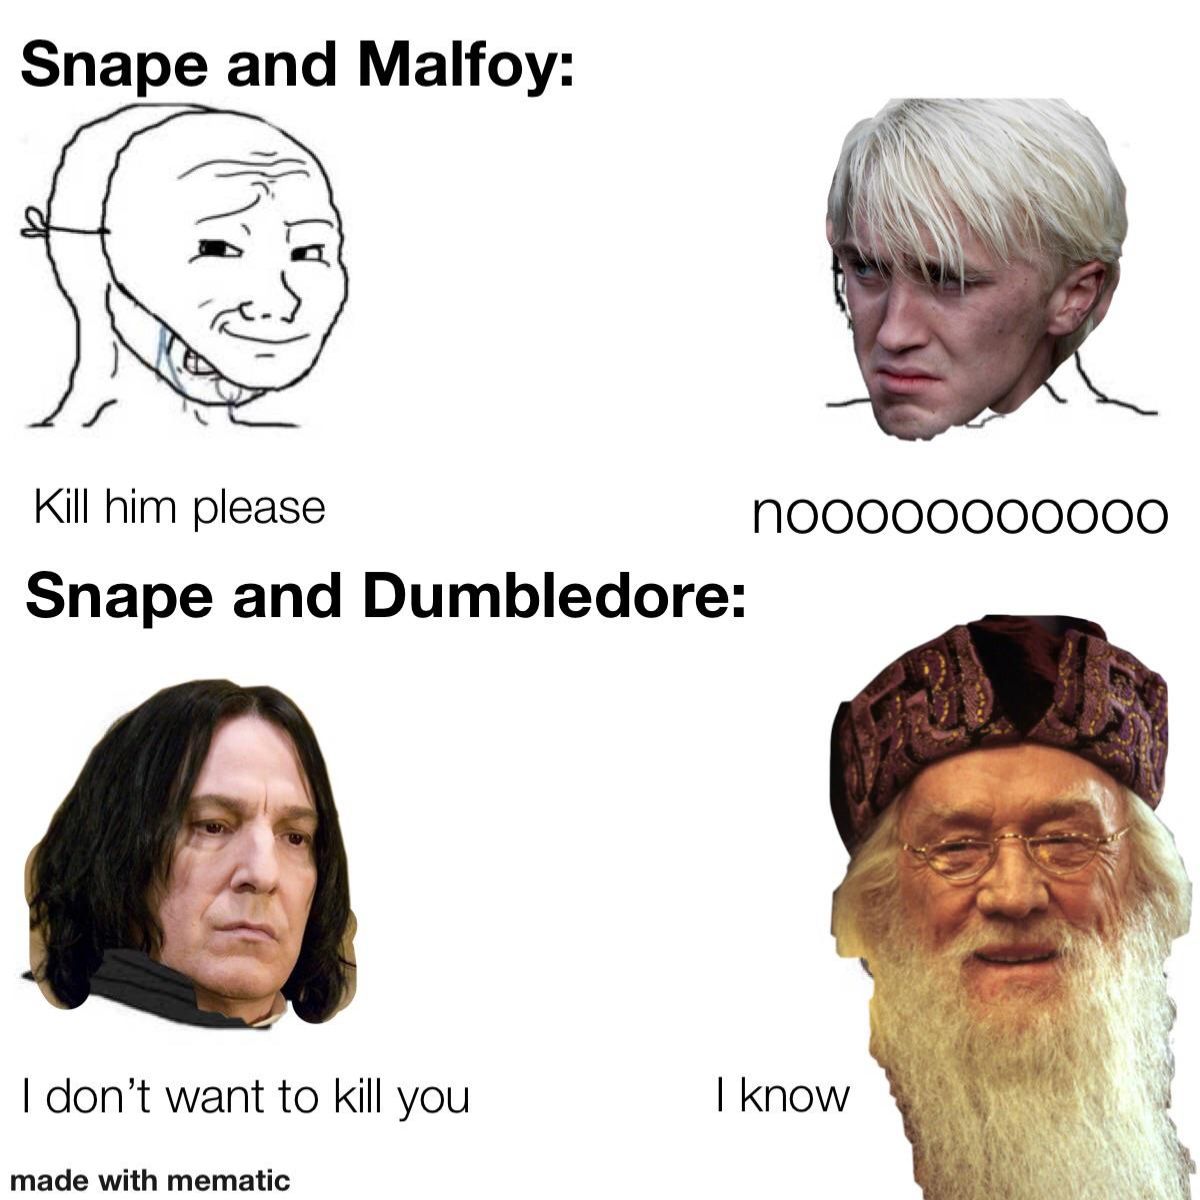 An image of Snape talking to Draco and Dumbledore in meme format